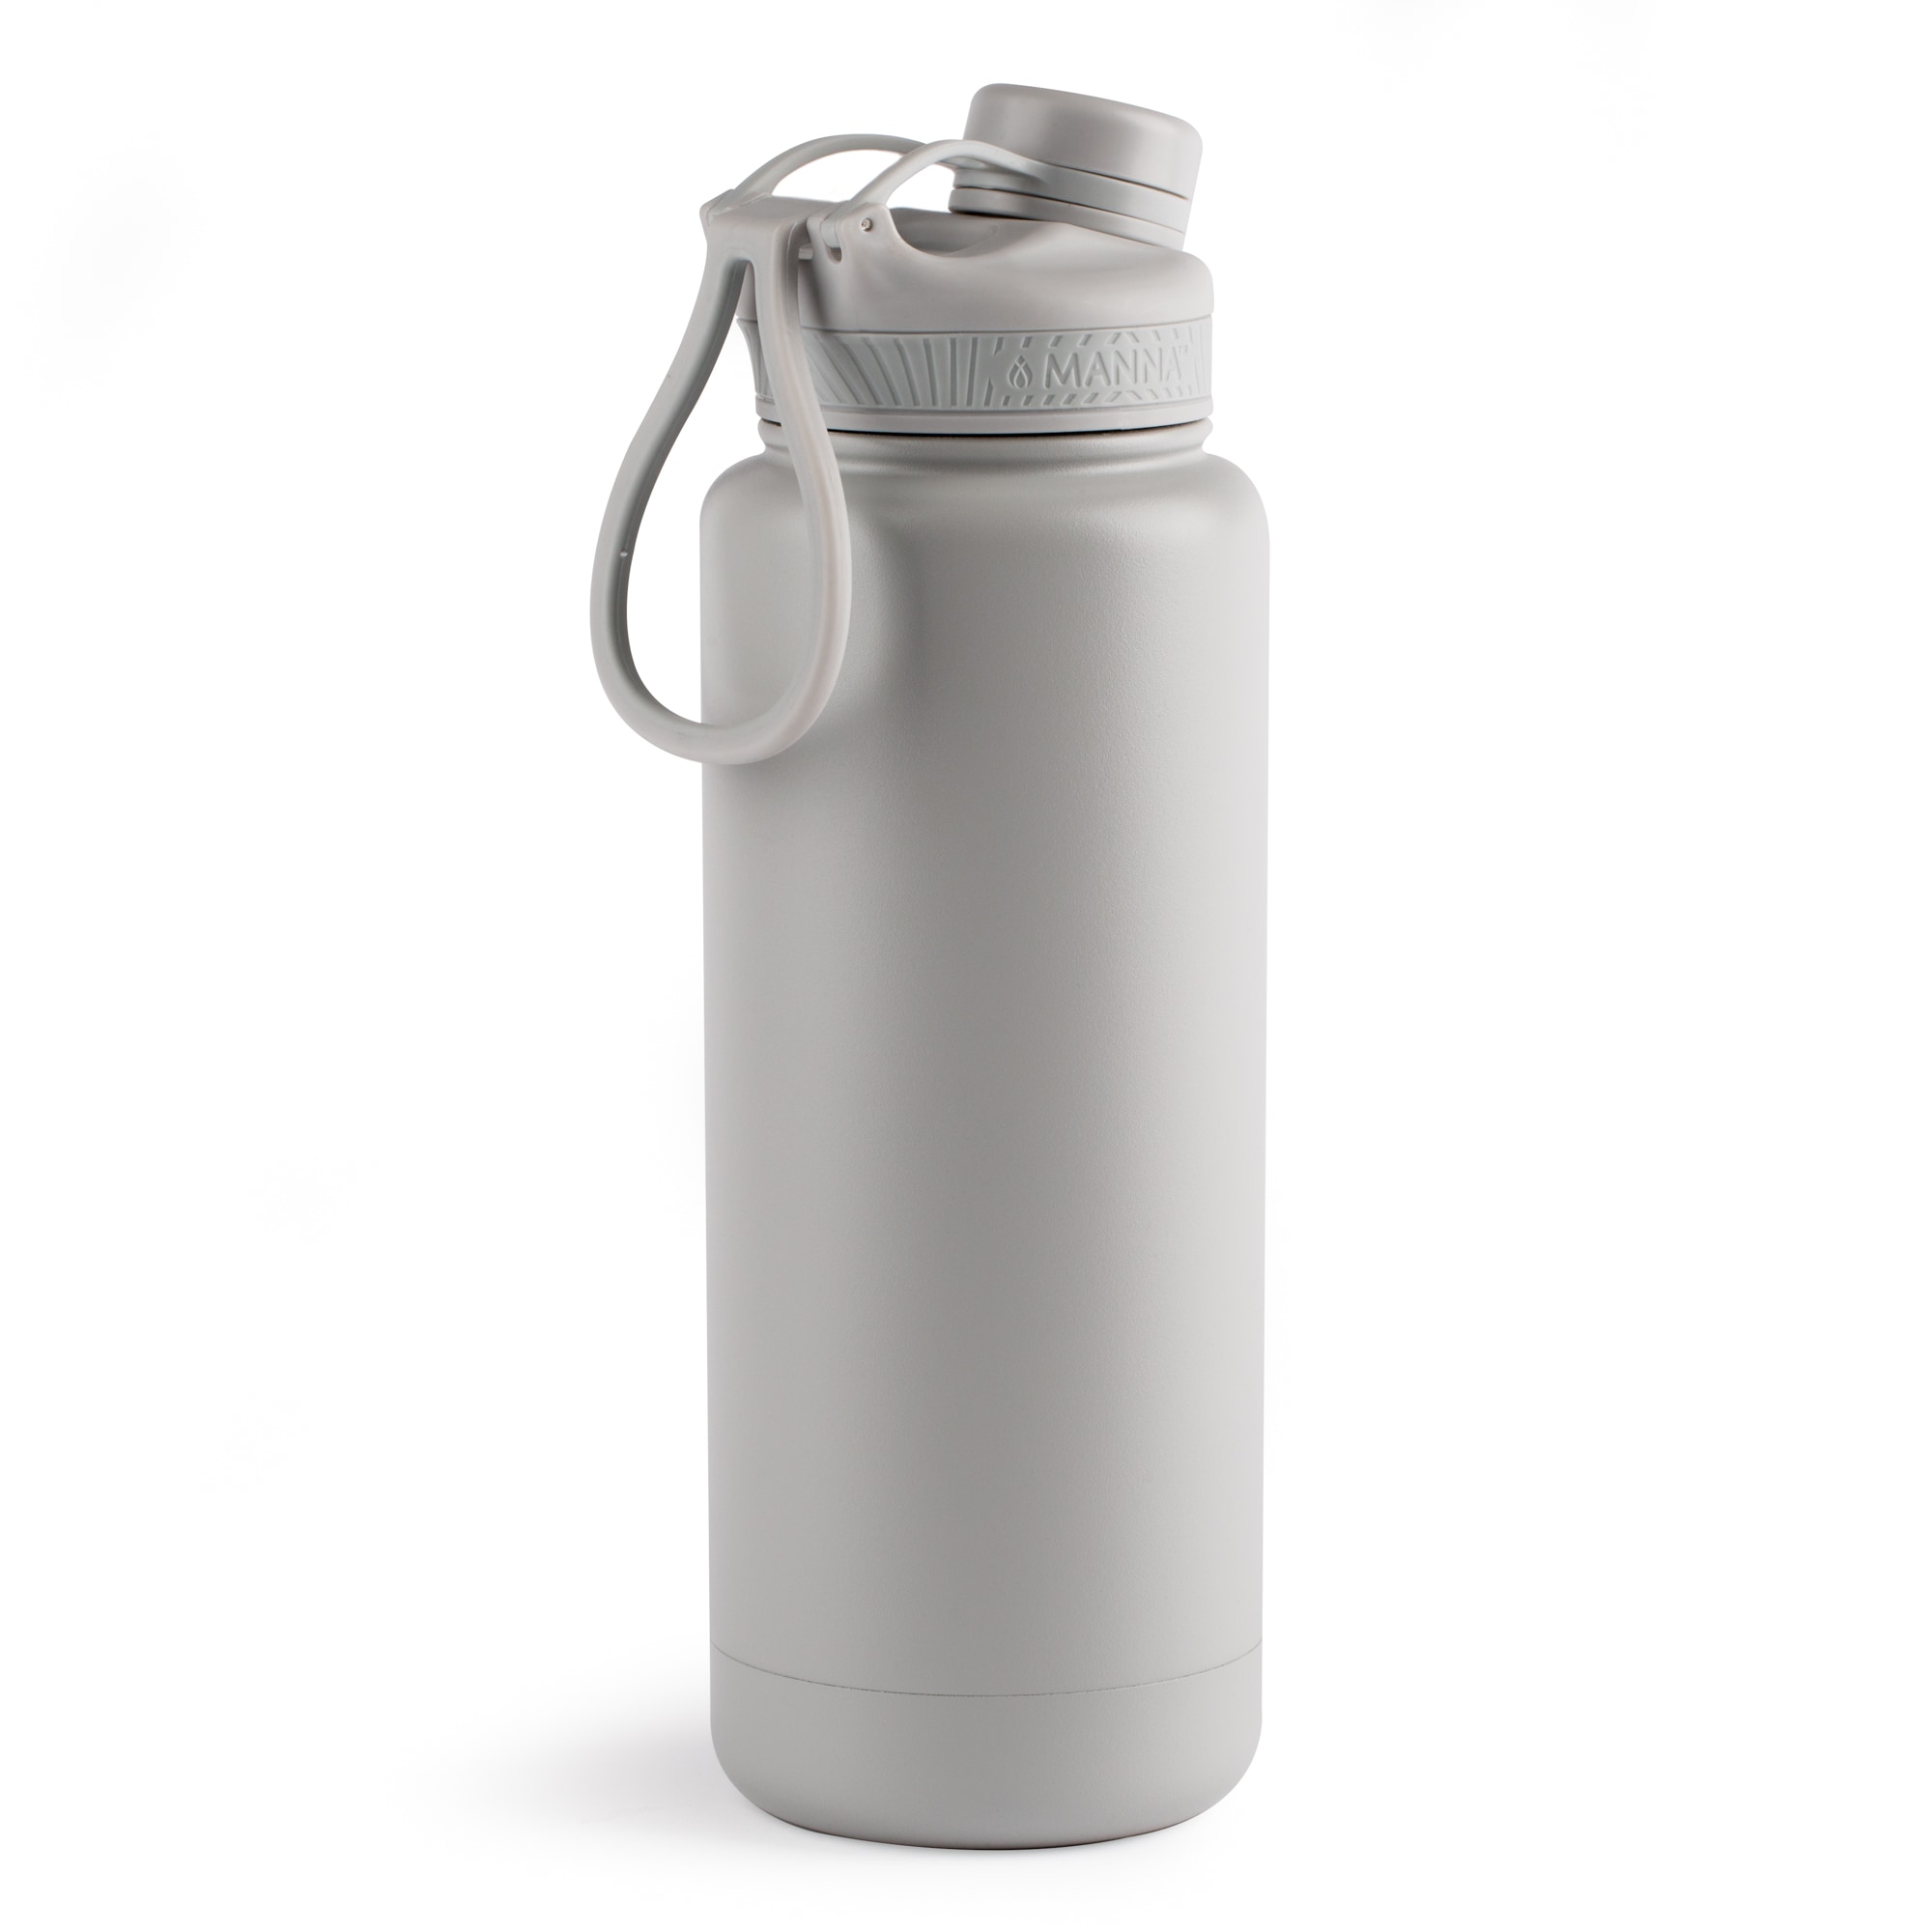 Manna 40 Fl Oz Stainless Steel Insulated Water Bottle At 8778